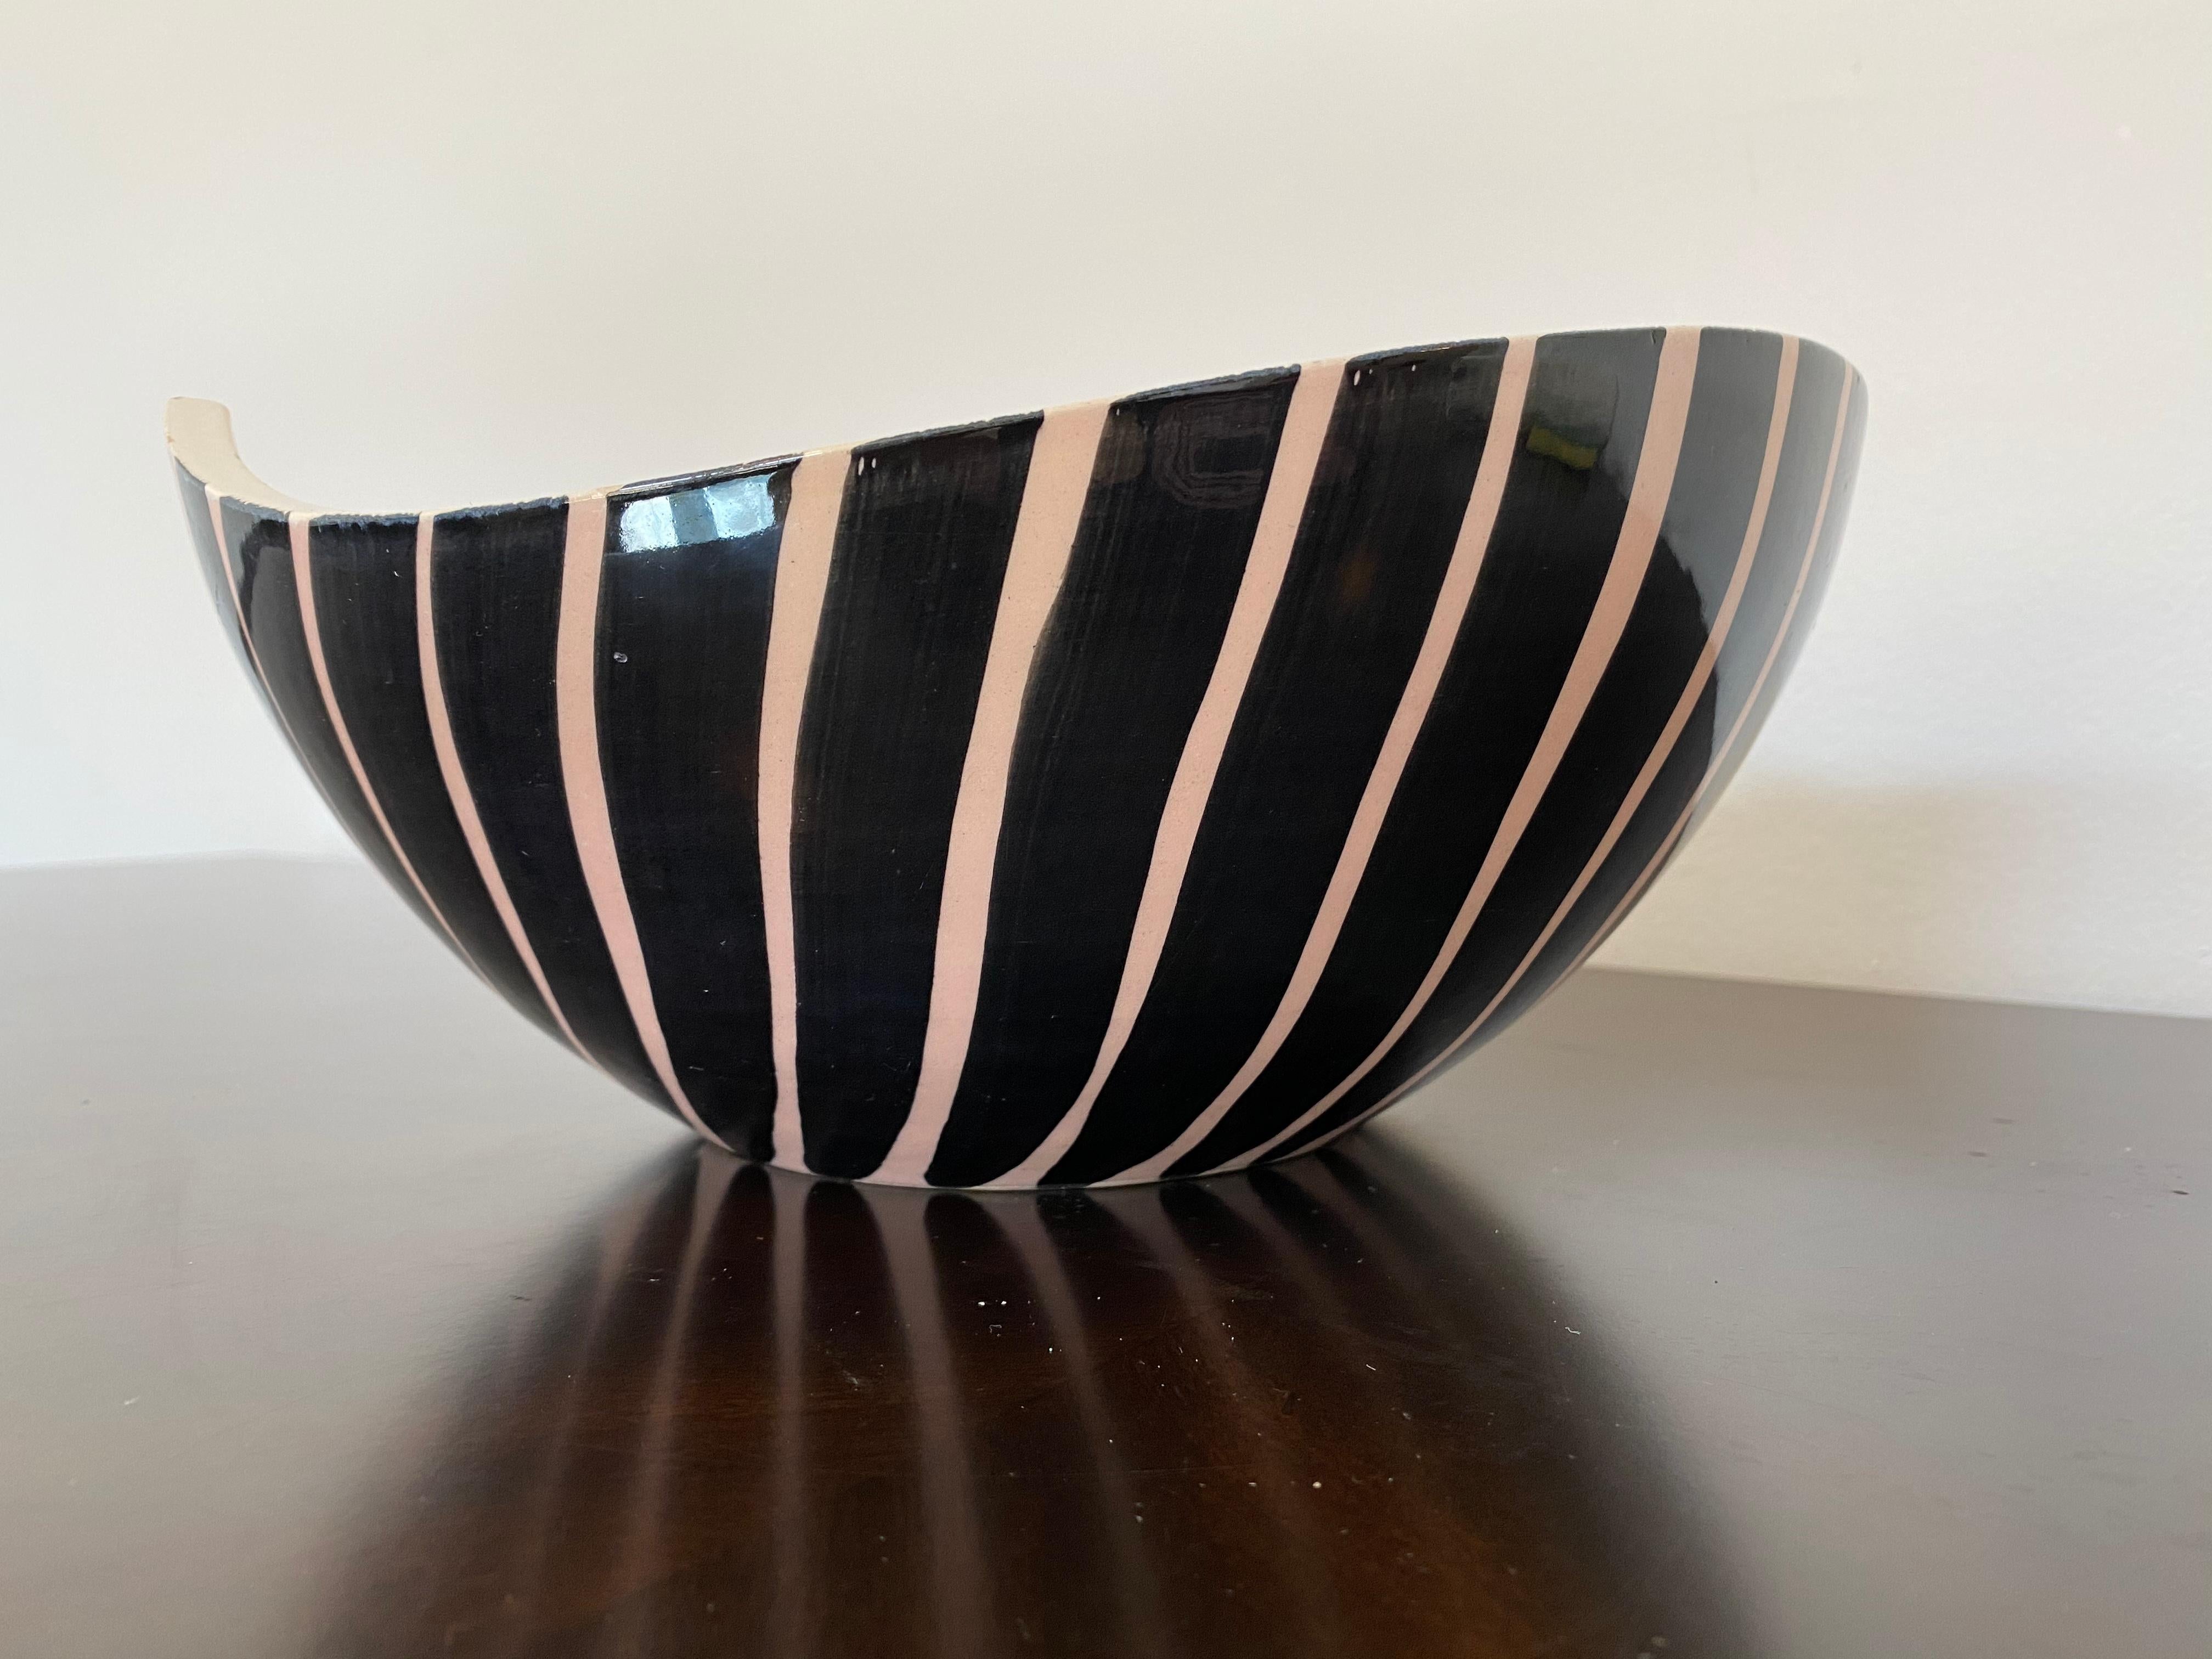 An original 1960s pale pink and black striped glossy glazed bowl by famed French ceramicist, Pol Chambost. Signed. The inner bowl is a mottled pale pink. The top shape is either a heart or tear drop.